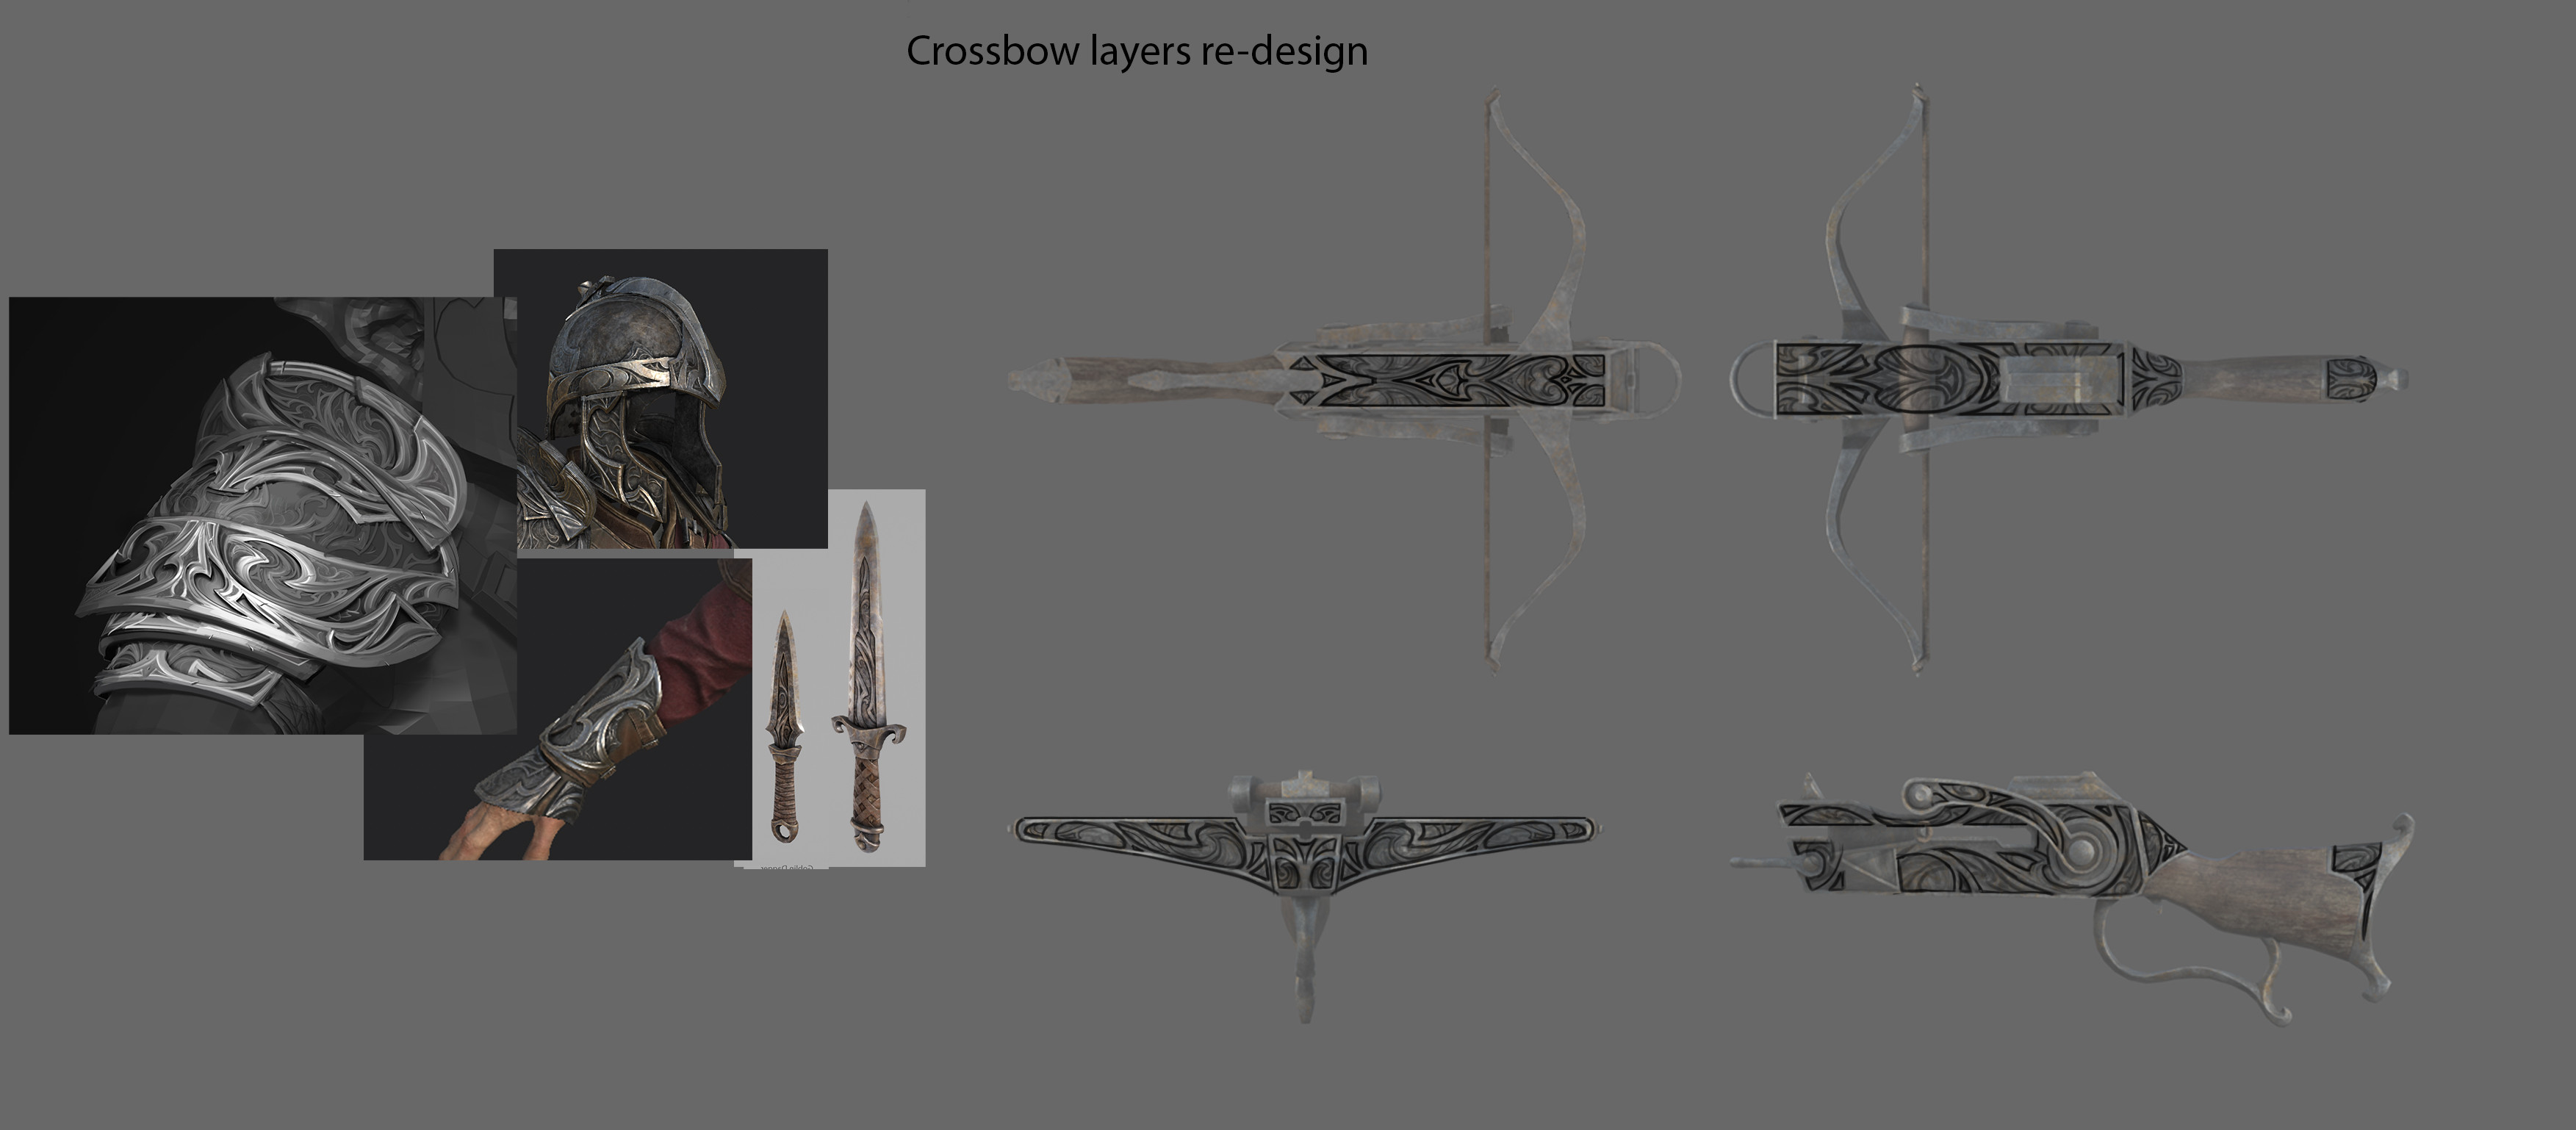 Crossbow metal work redesign. Nasan Hardcastle did the original concept for the crossbow. Unfortunately the metal work didn't match what Danny Russon and Dallin Jones had done with all of the goblin armors. 